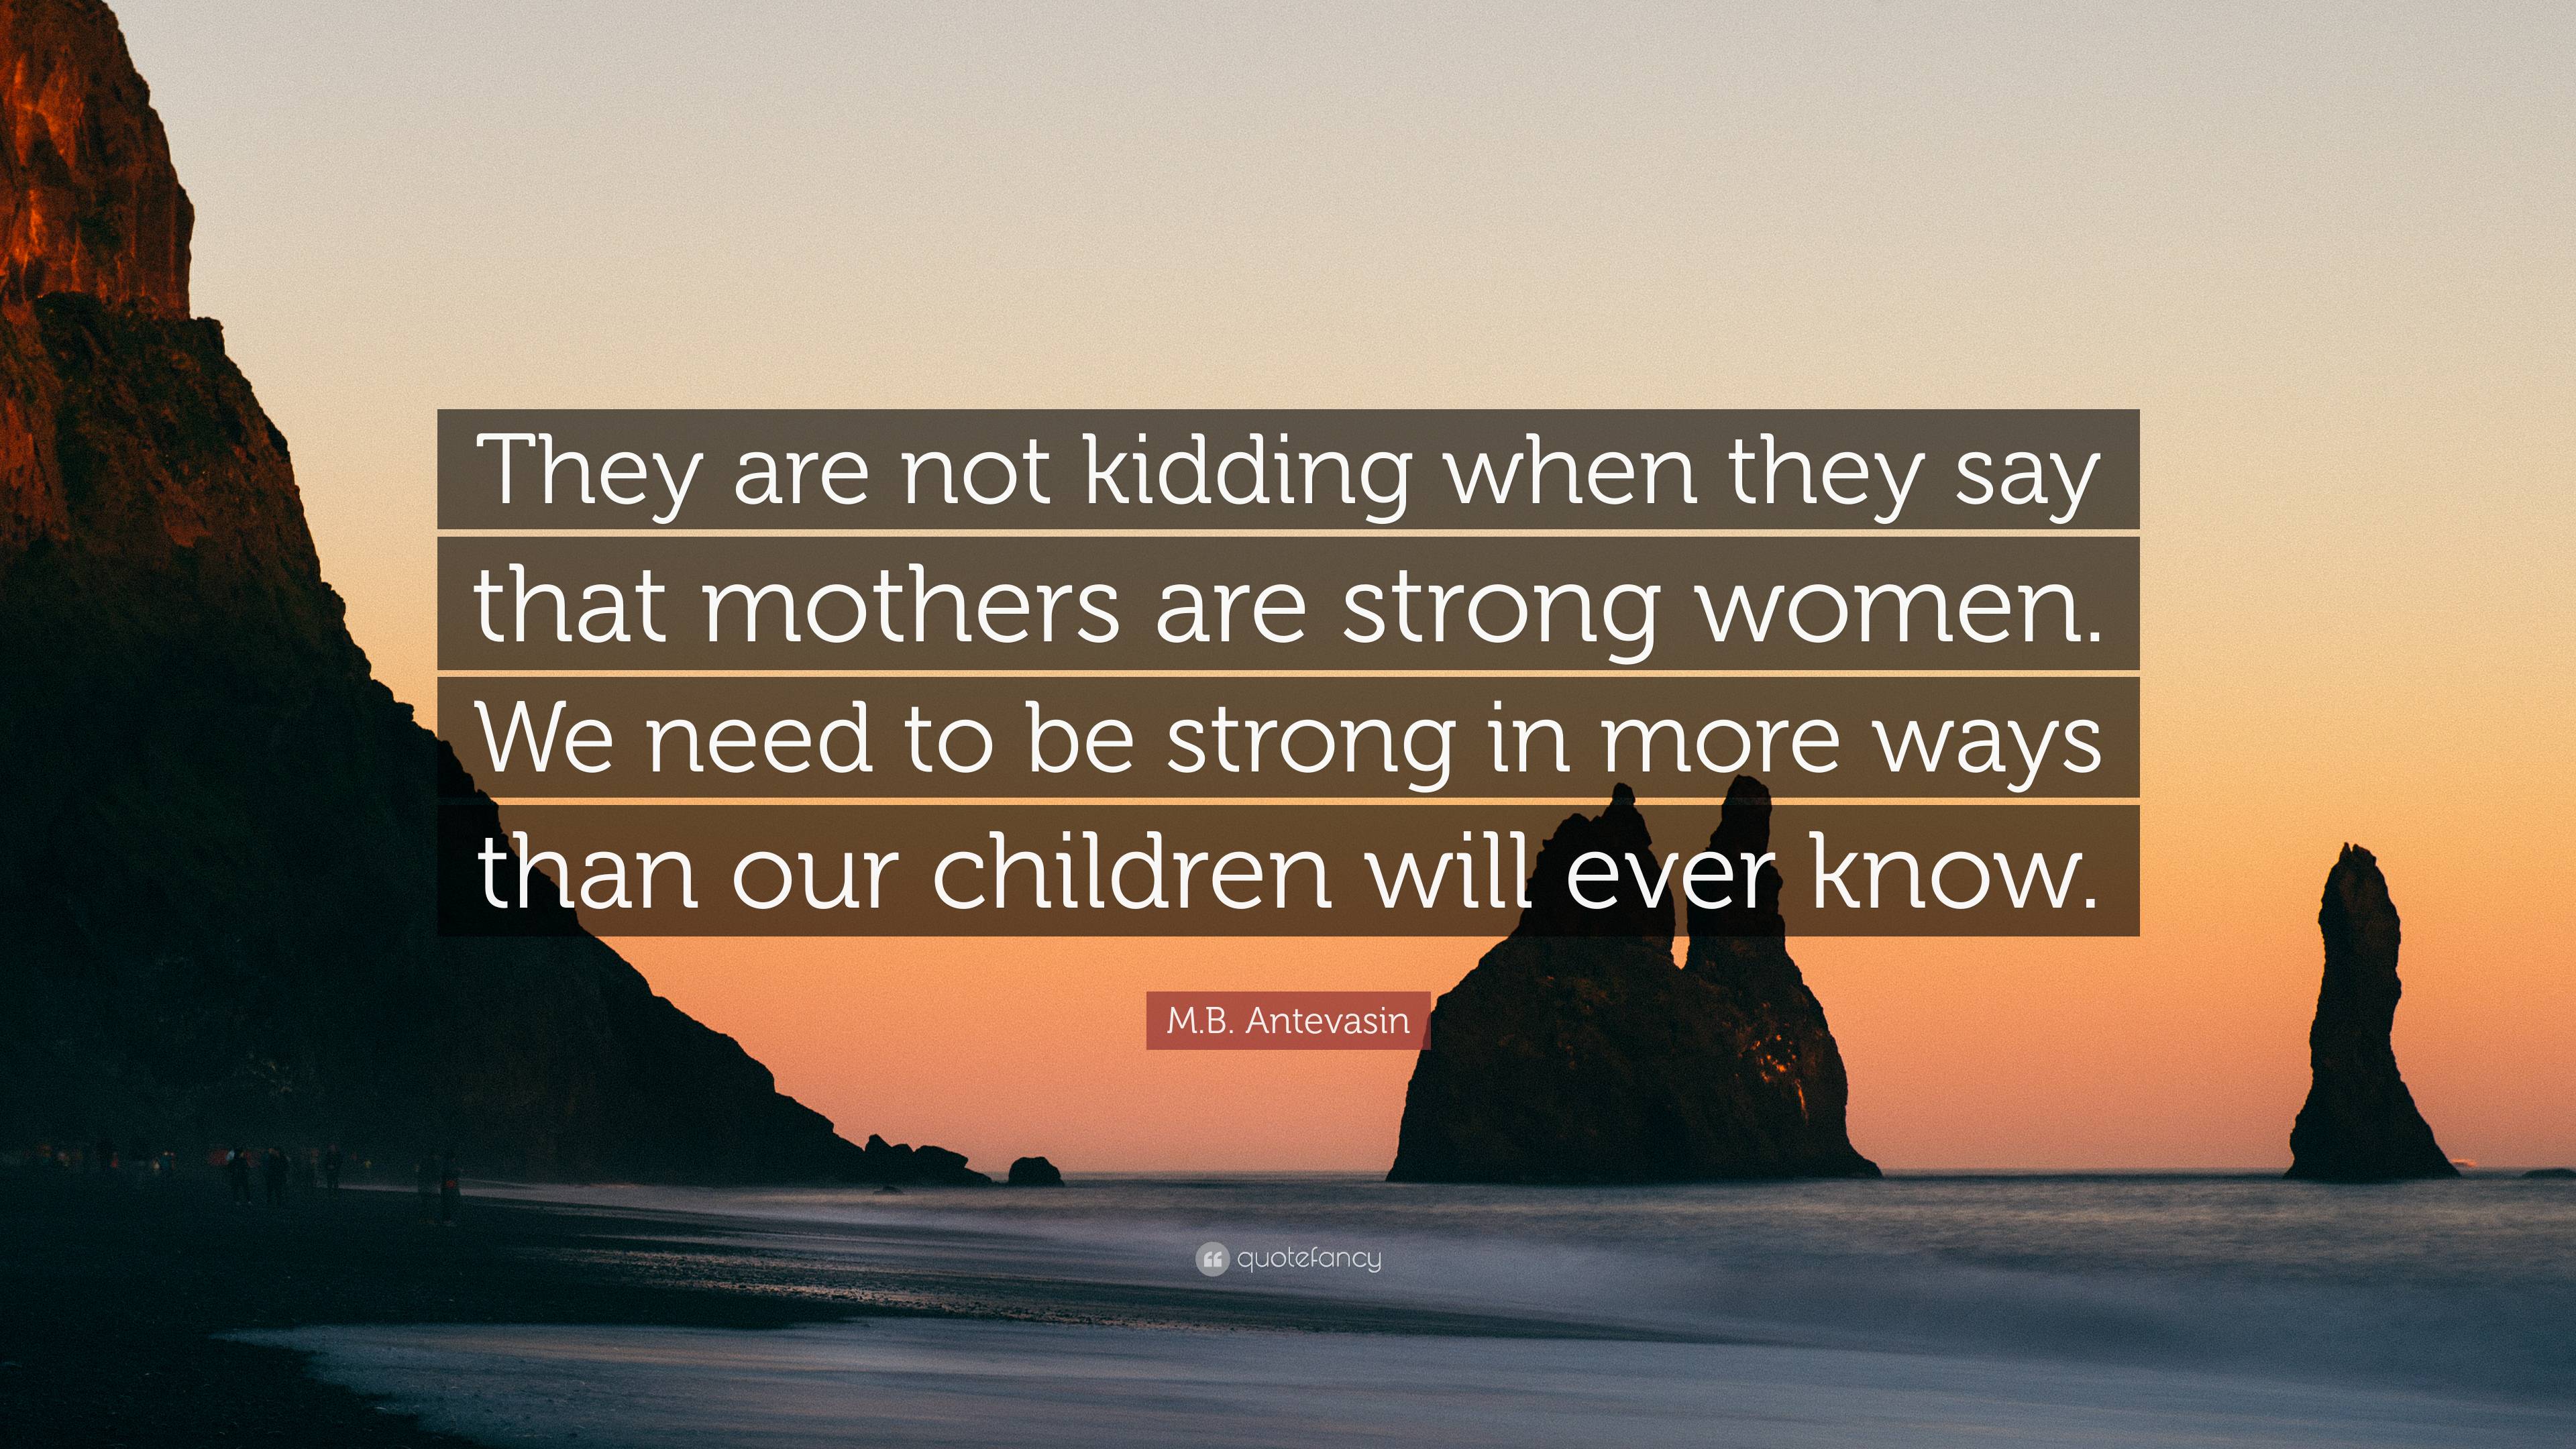 M.B. Antevasin Quote: “They are not kidding when they say that mothers are  strong women. We need to be strong in more ways than our children wi...”